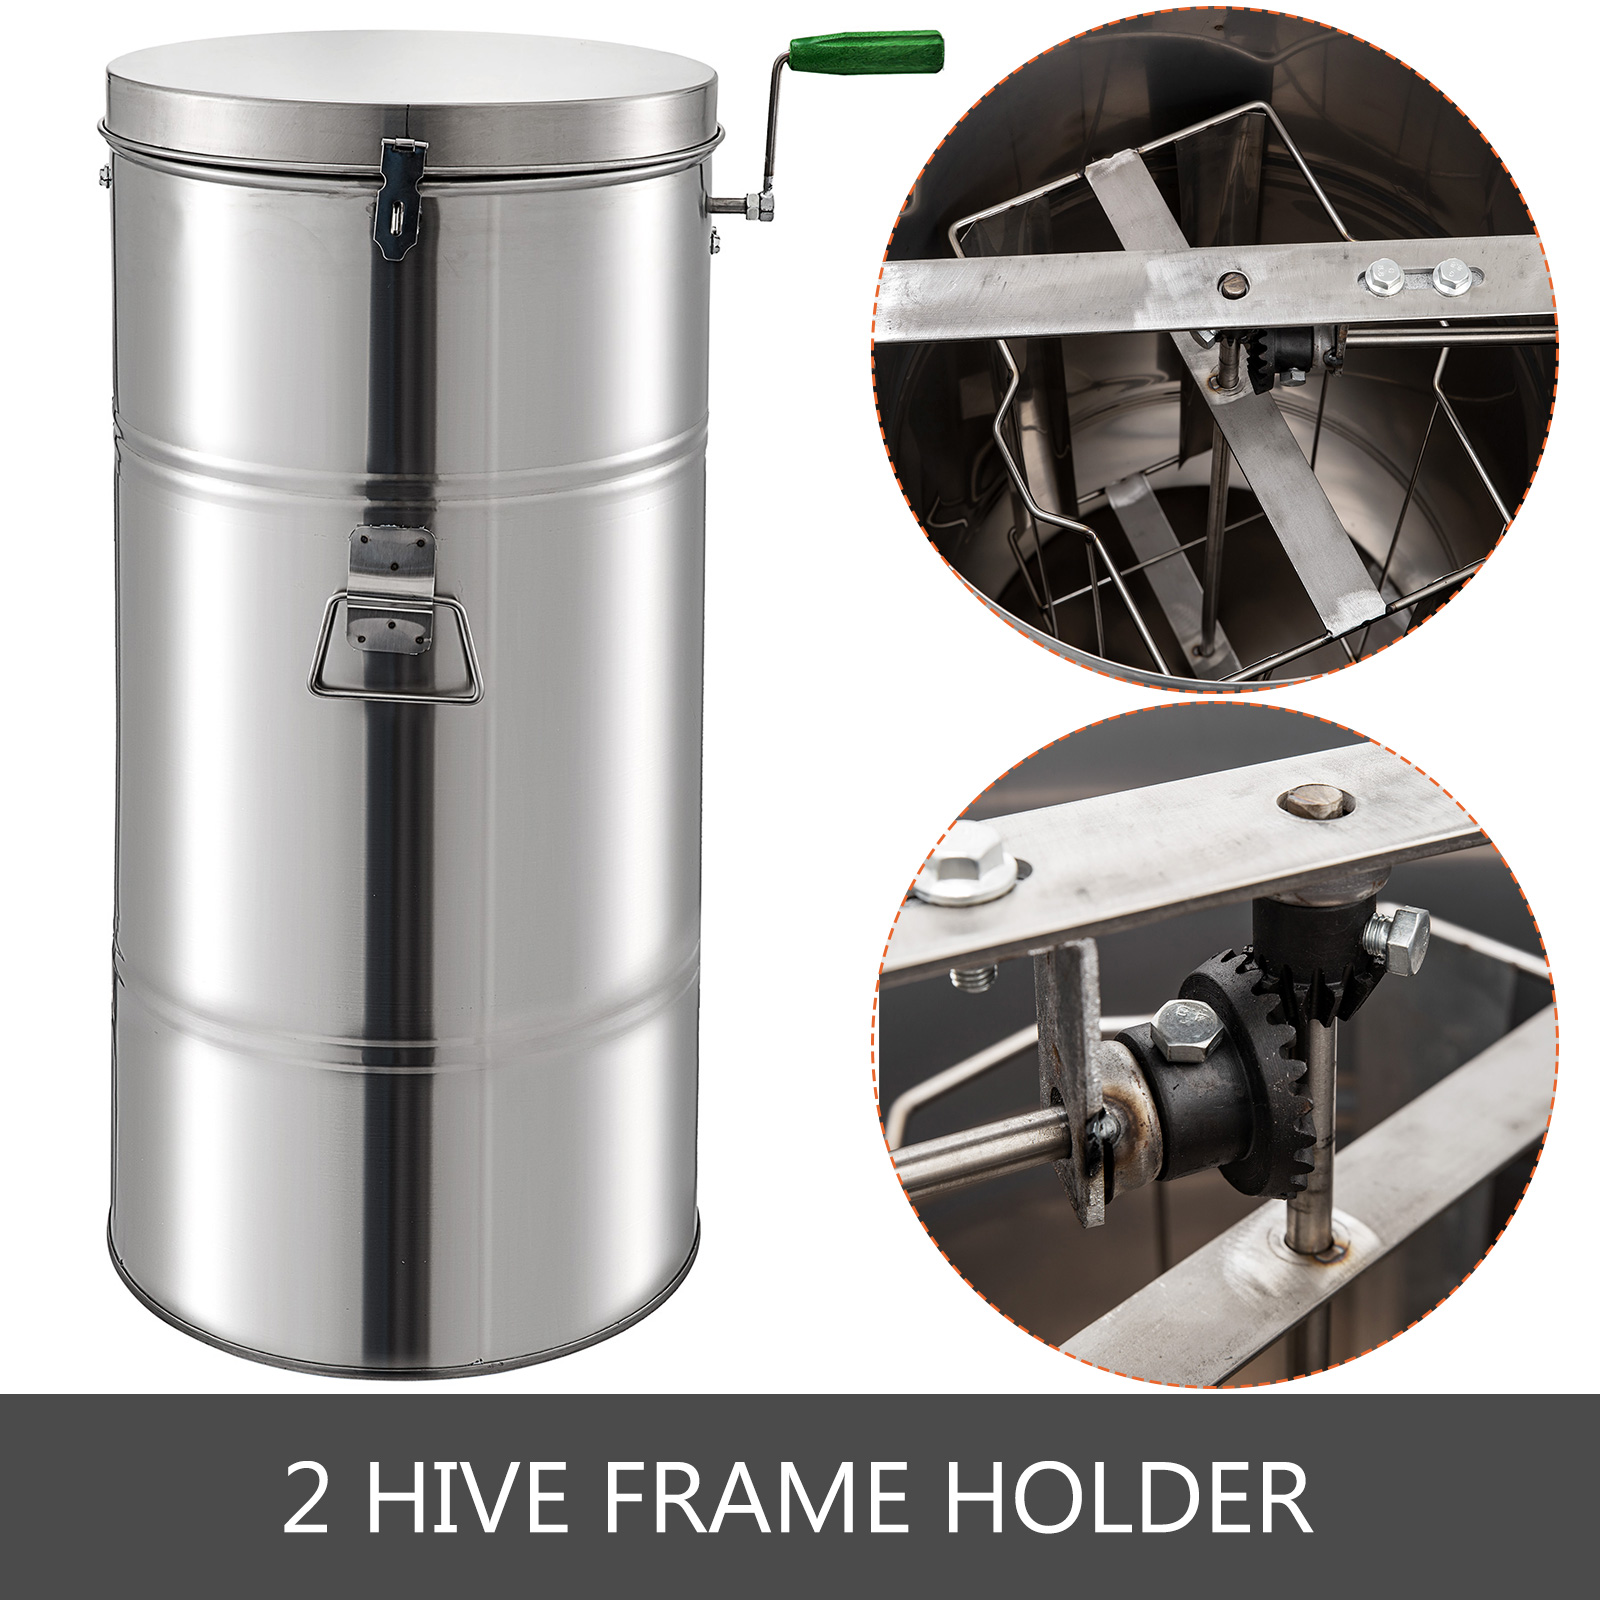 Durable 2 Frame Bee Honey Extractor Honeycomb Stainless Steel USA Hot for sale online 